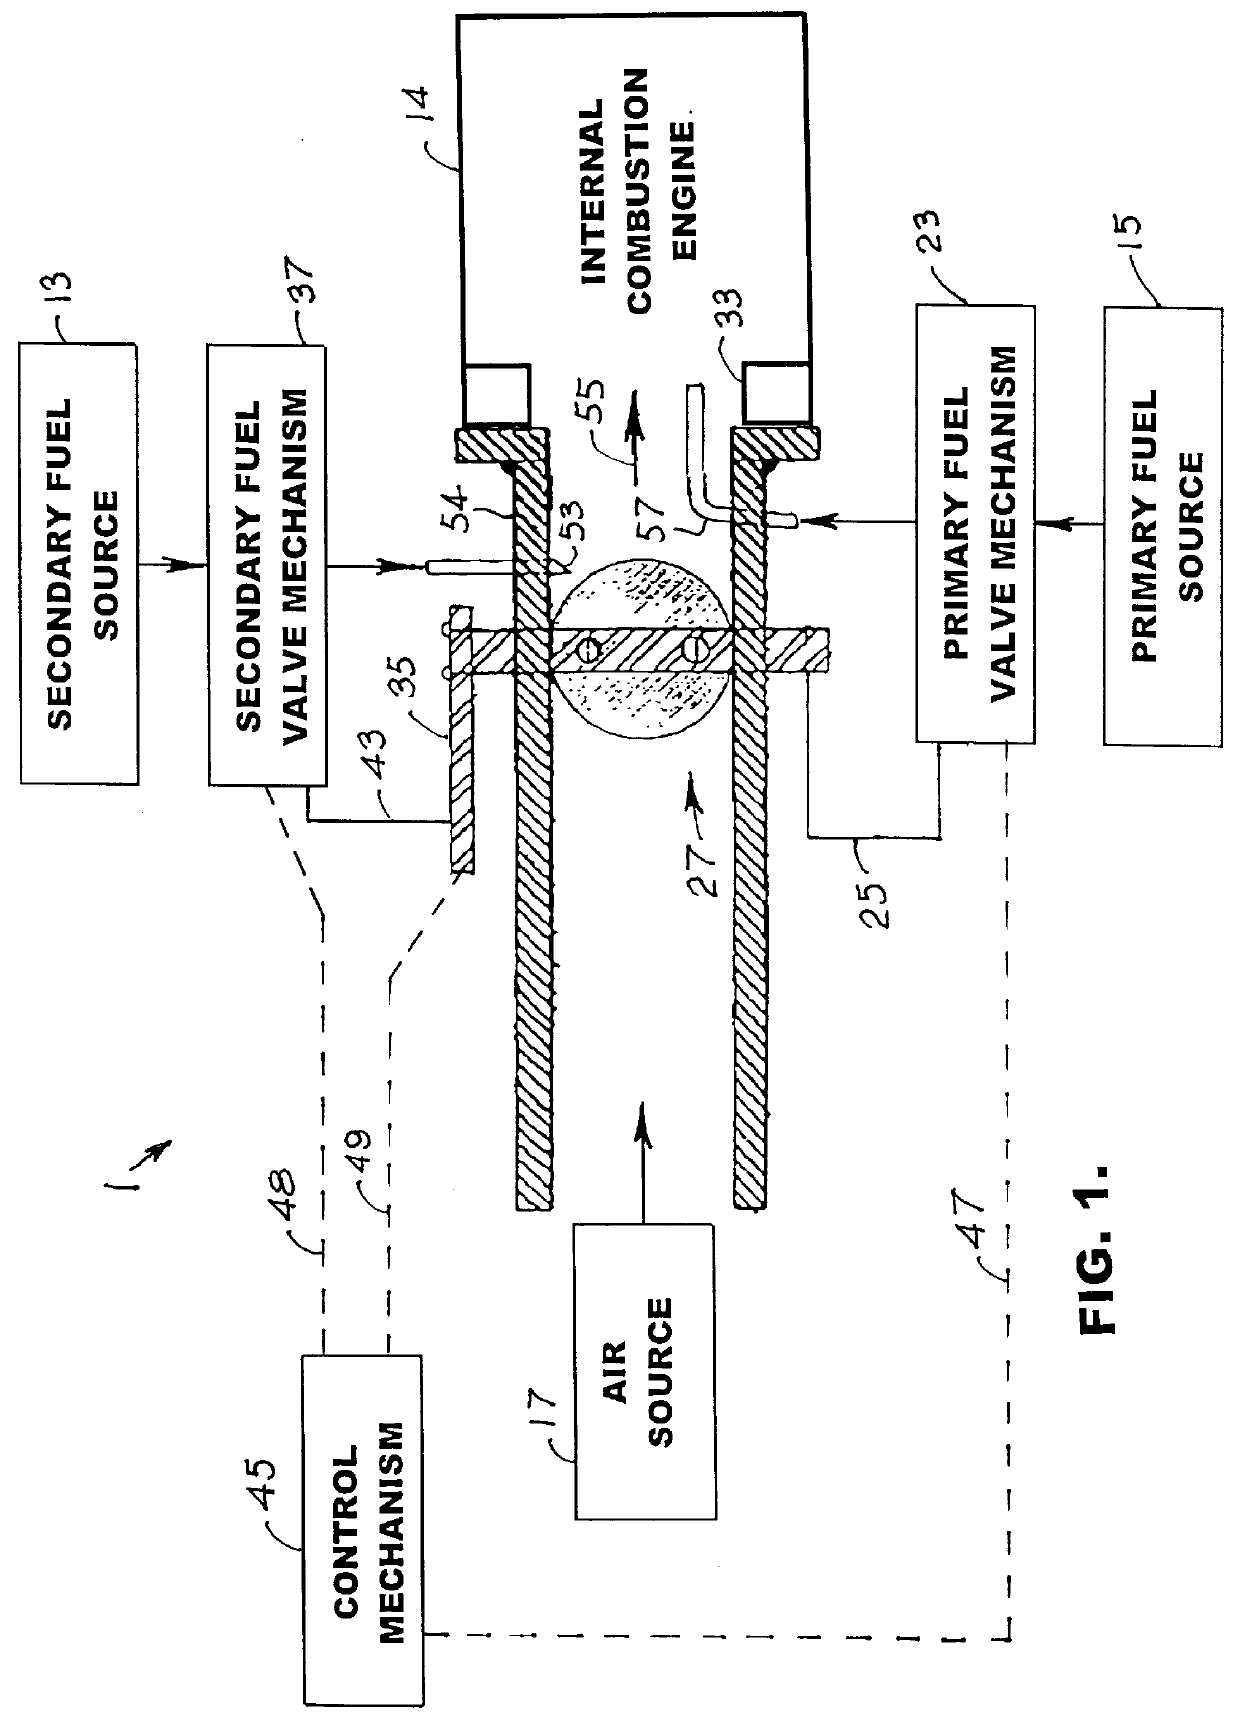 Internal combustion system using acetylene fuel